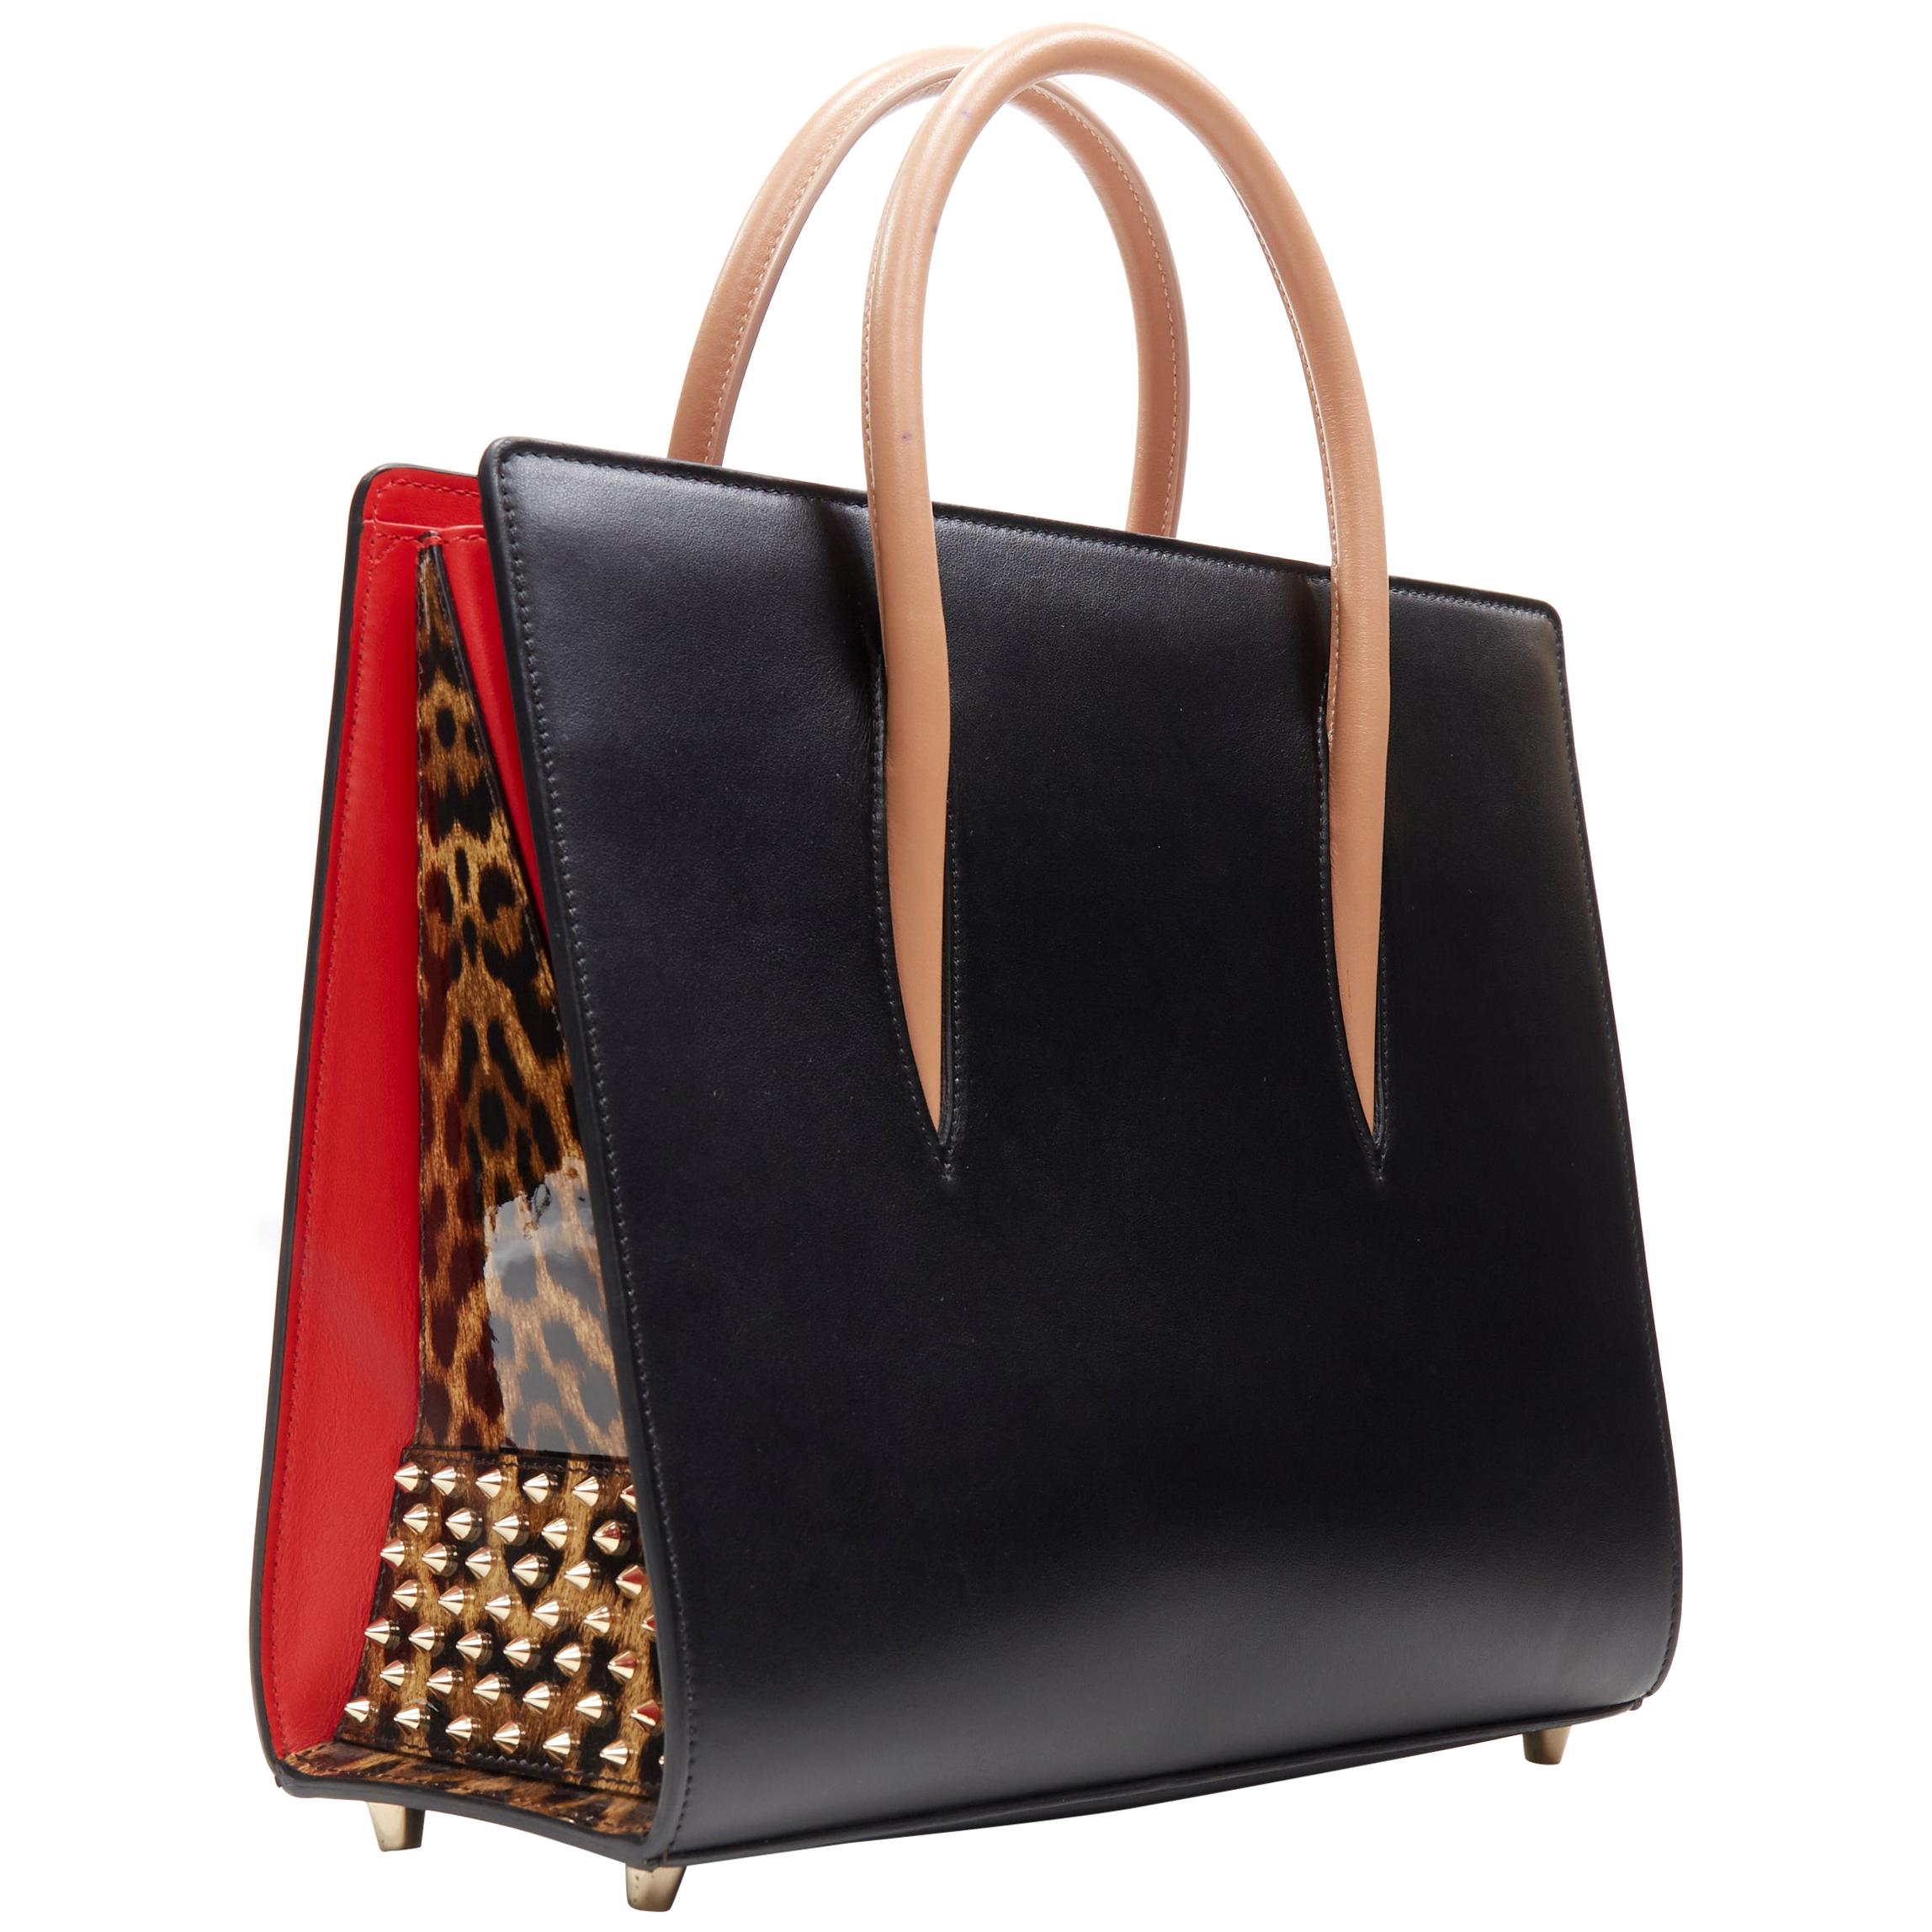 CHRISTIAN LOUBOUTIN Suede Paloma Tote - More Than You Can Imagine